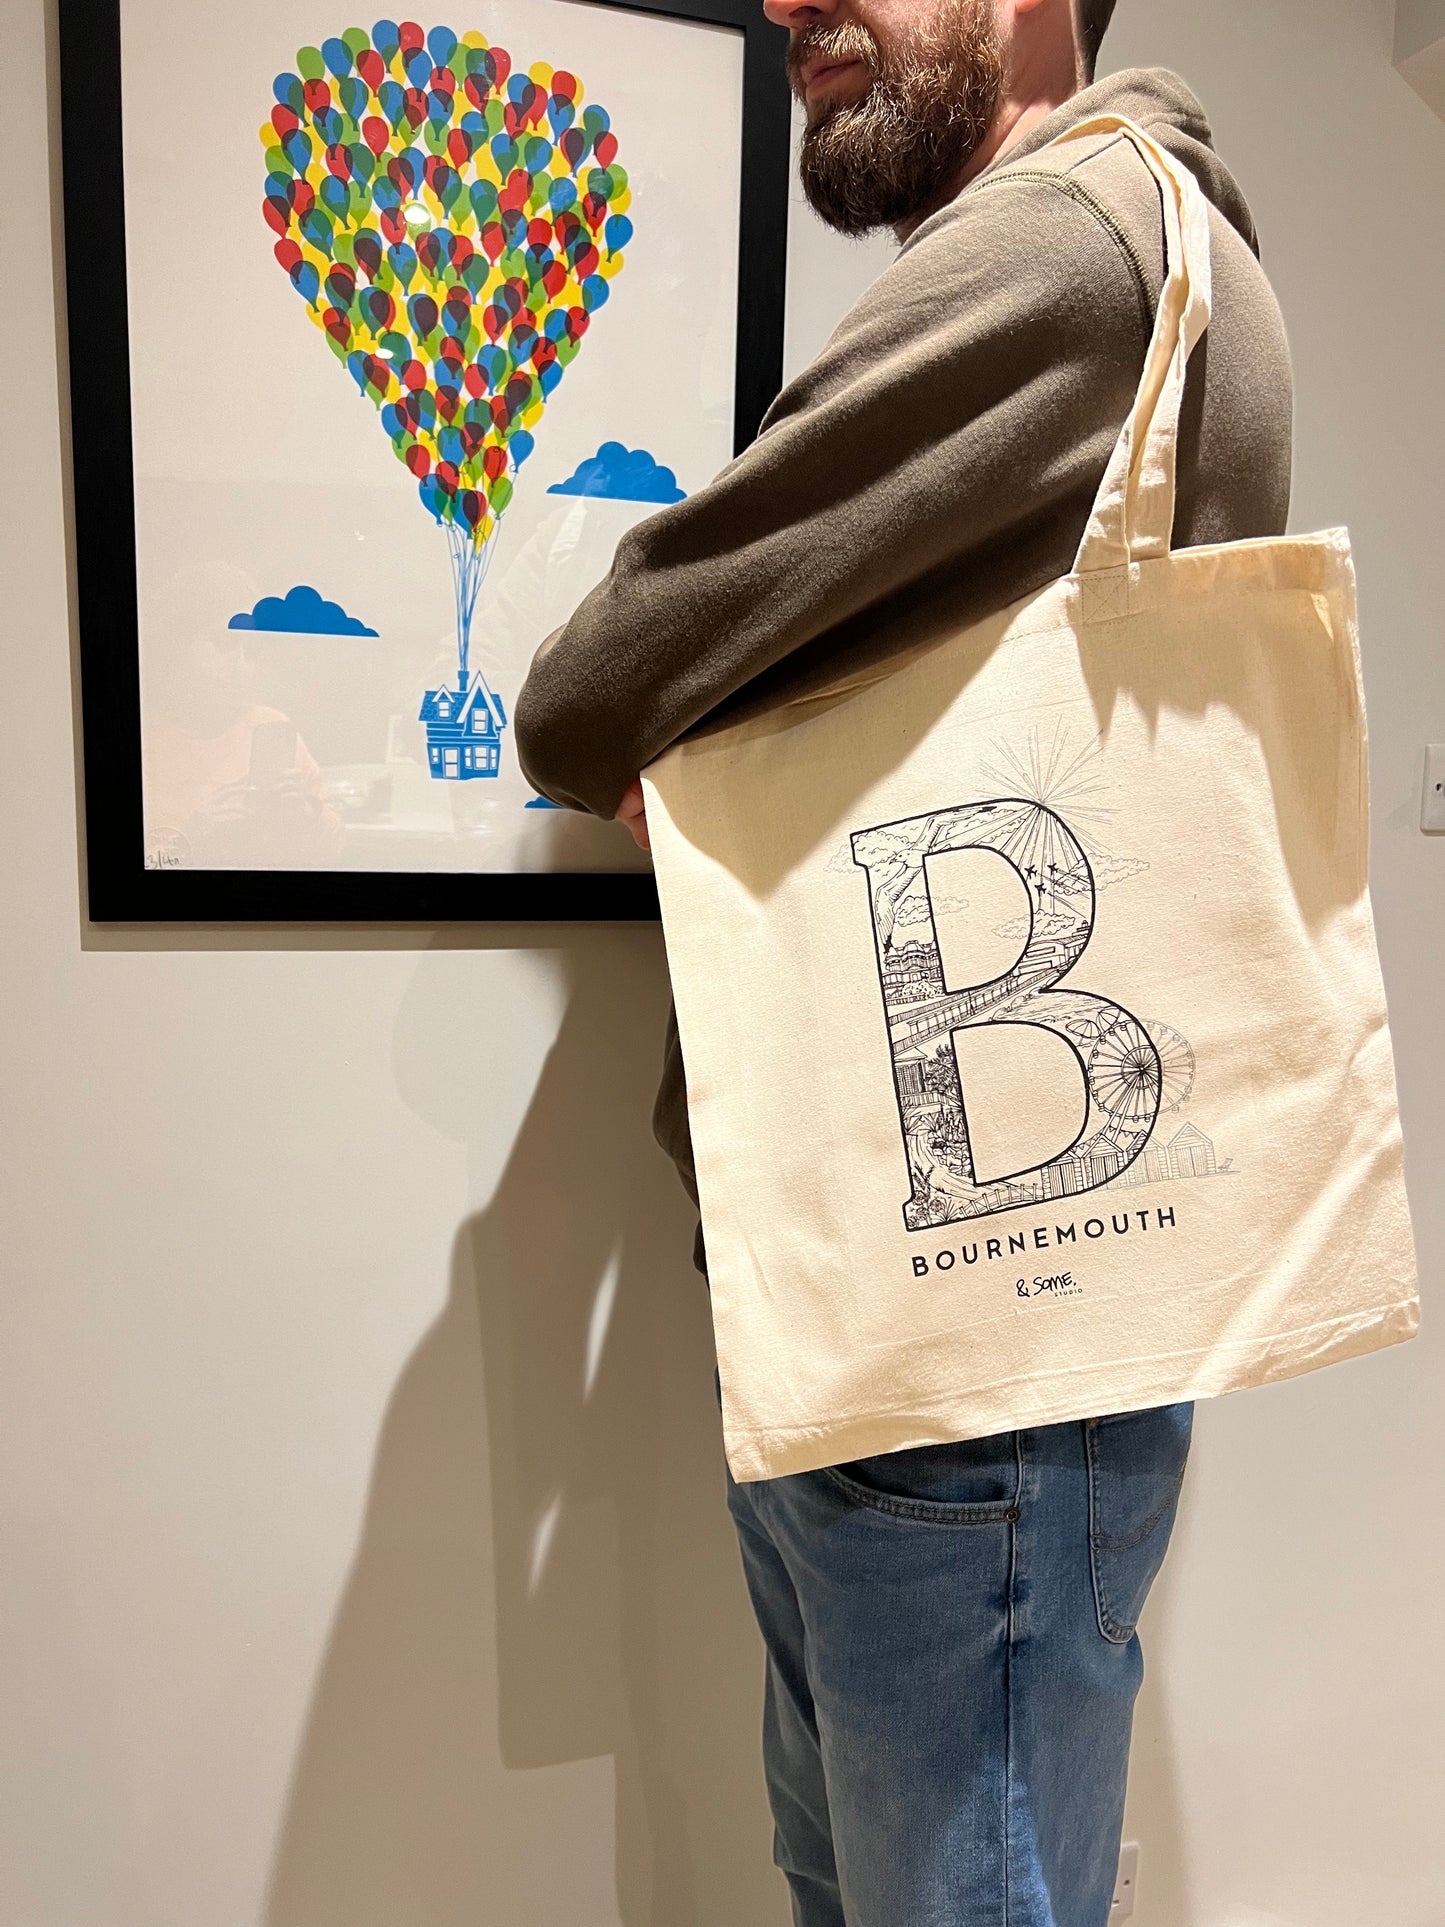 & Some 'B' is for Bournemouth Cotton Tote Bag